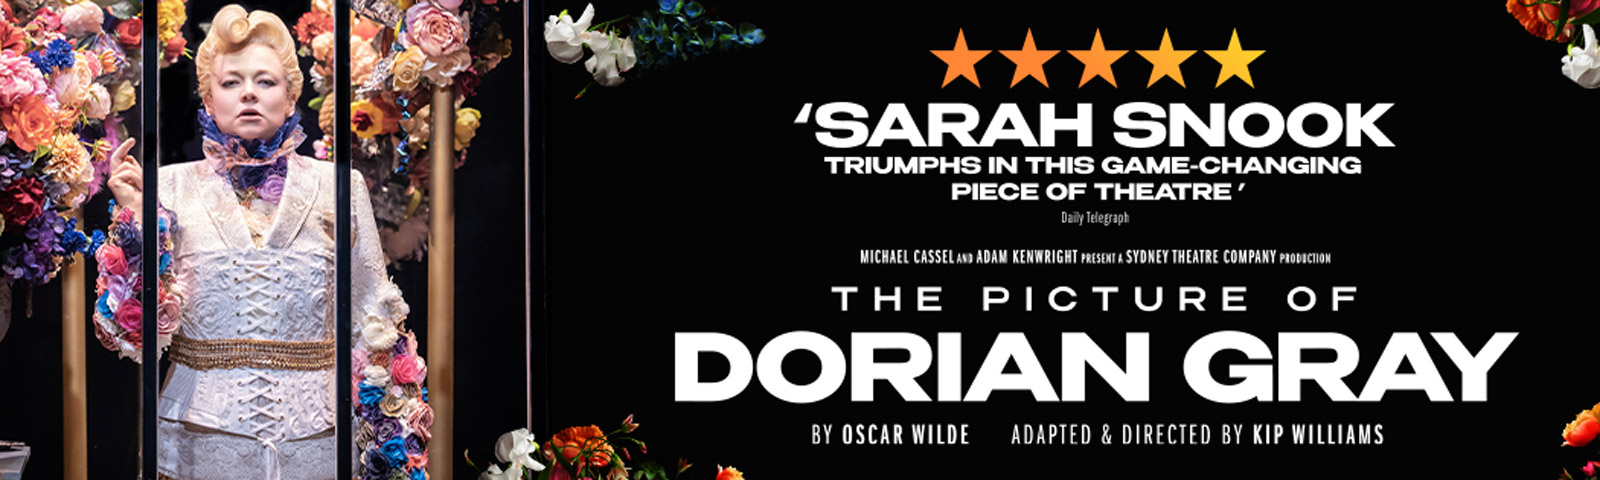 the-picture-of-dorian-gray-tickets